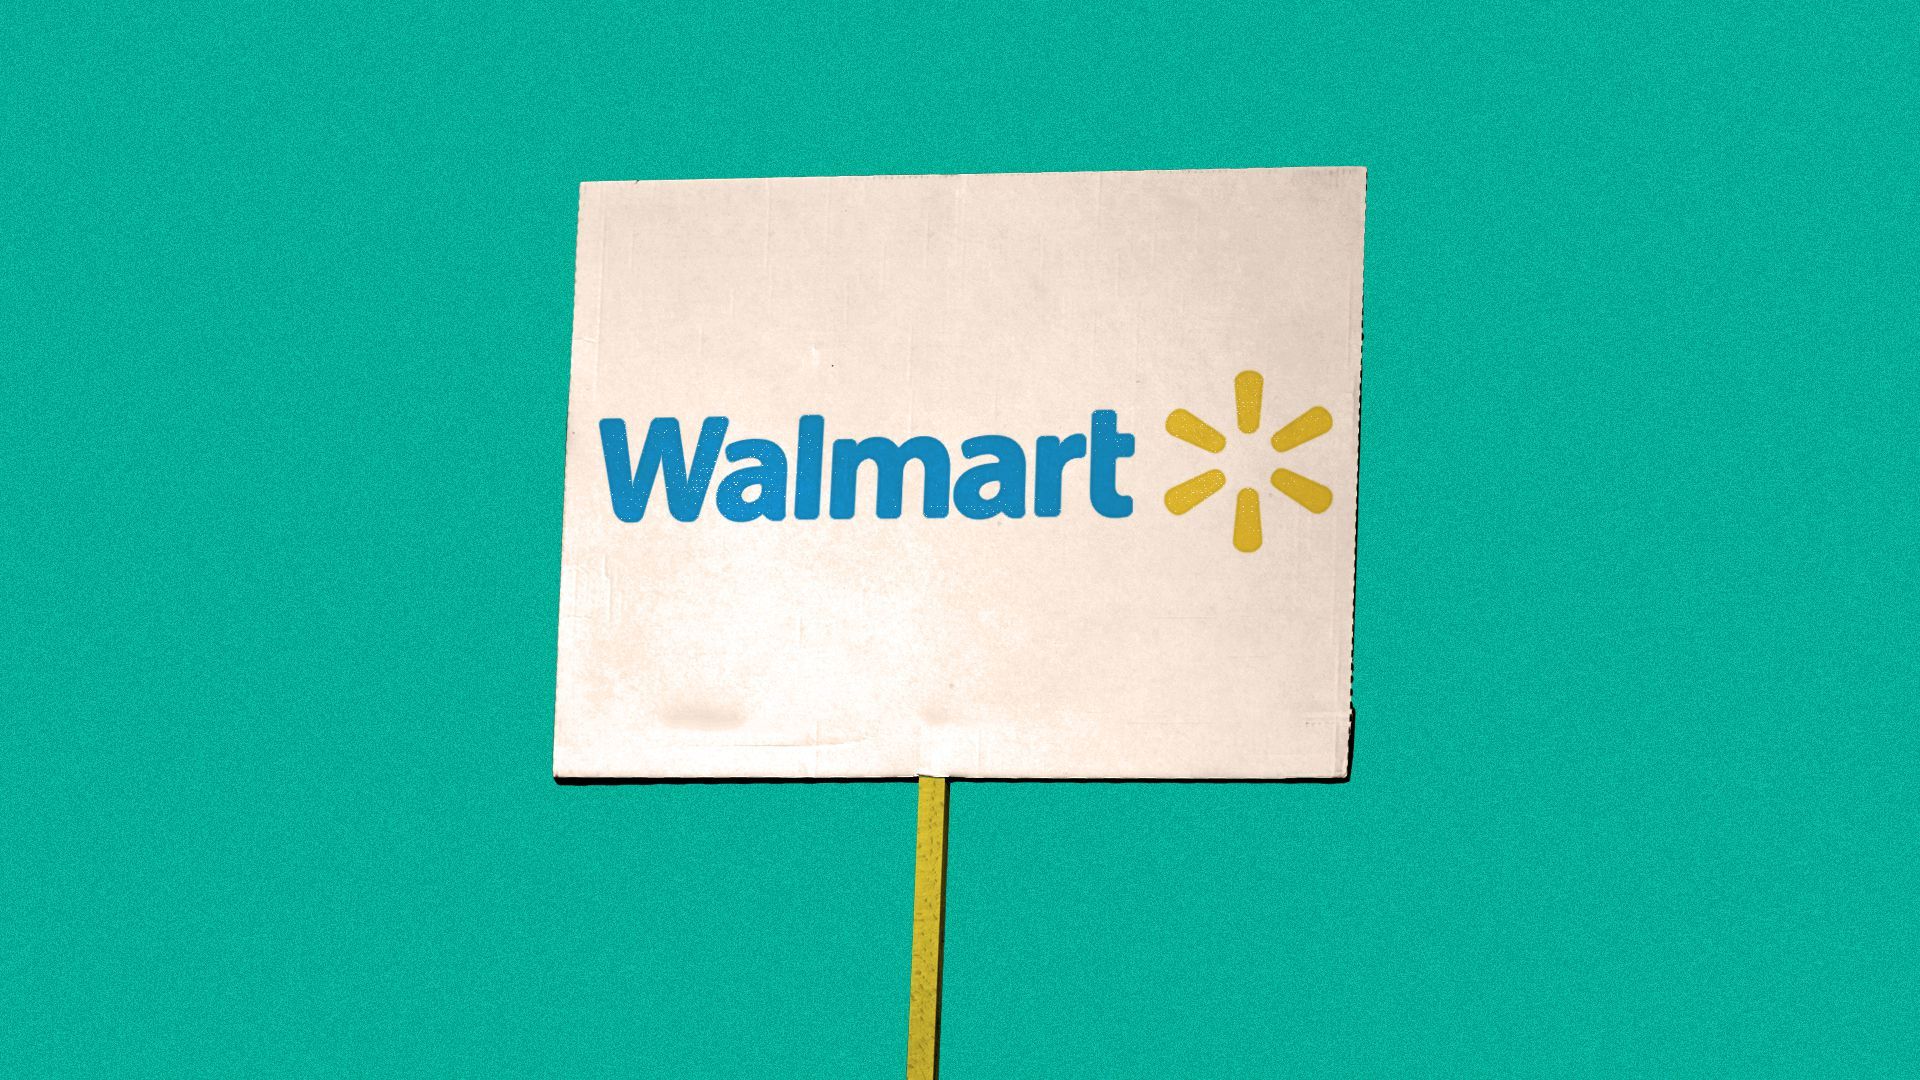 Illustration of a protest sign with the Walmart logo on it.